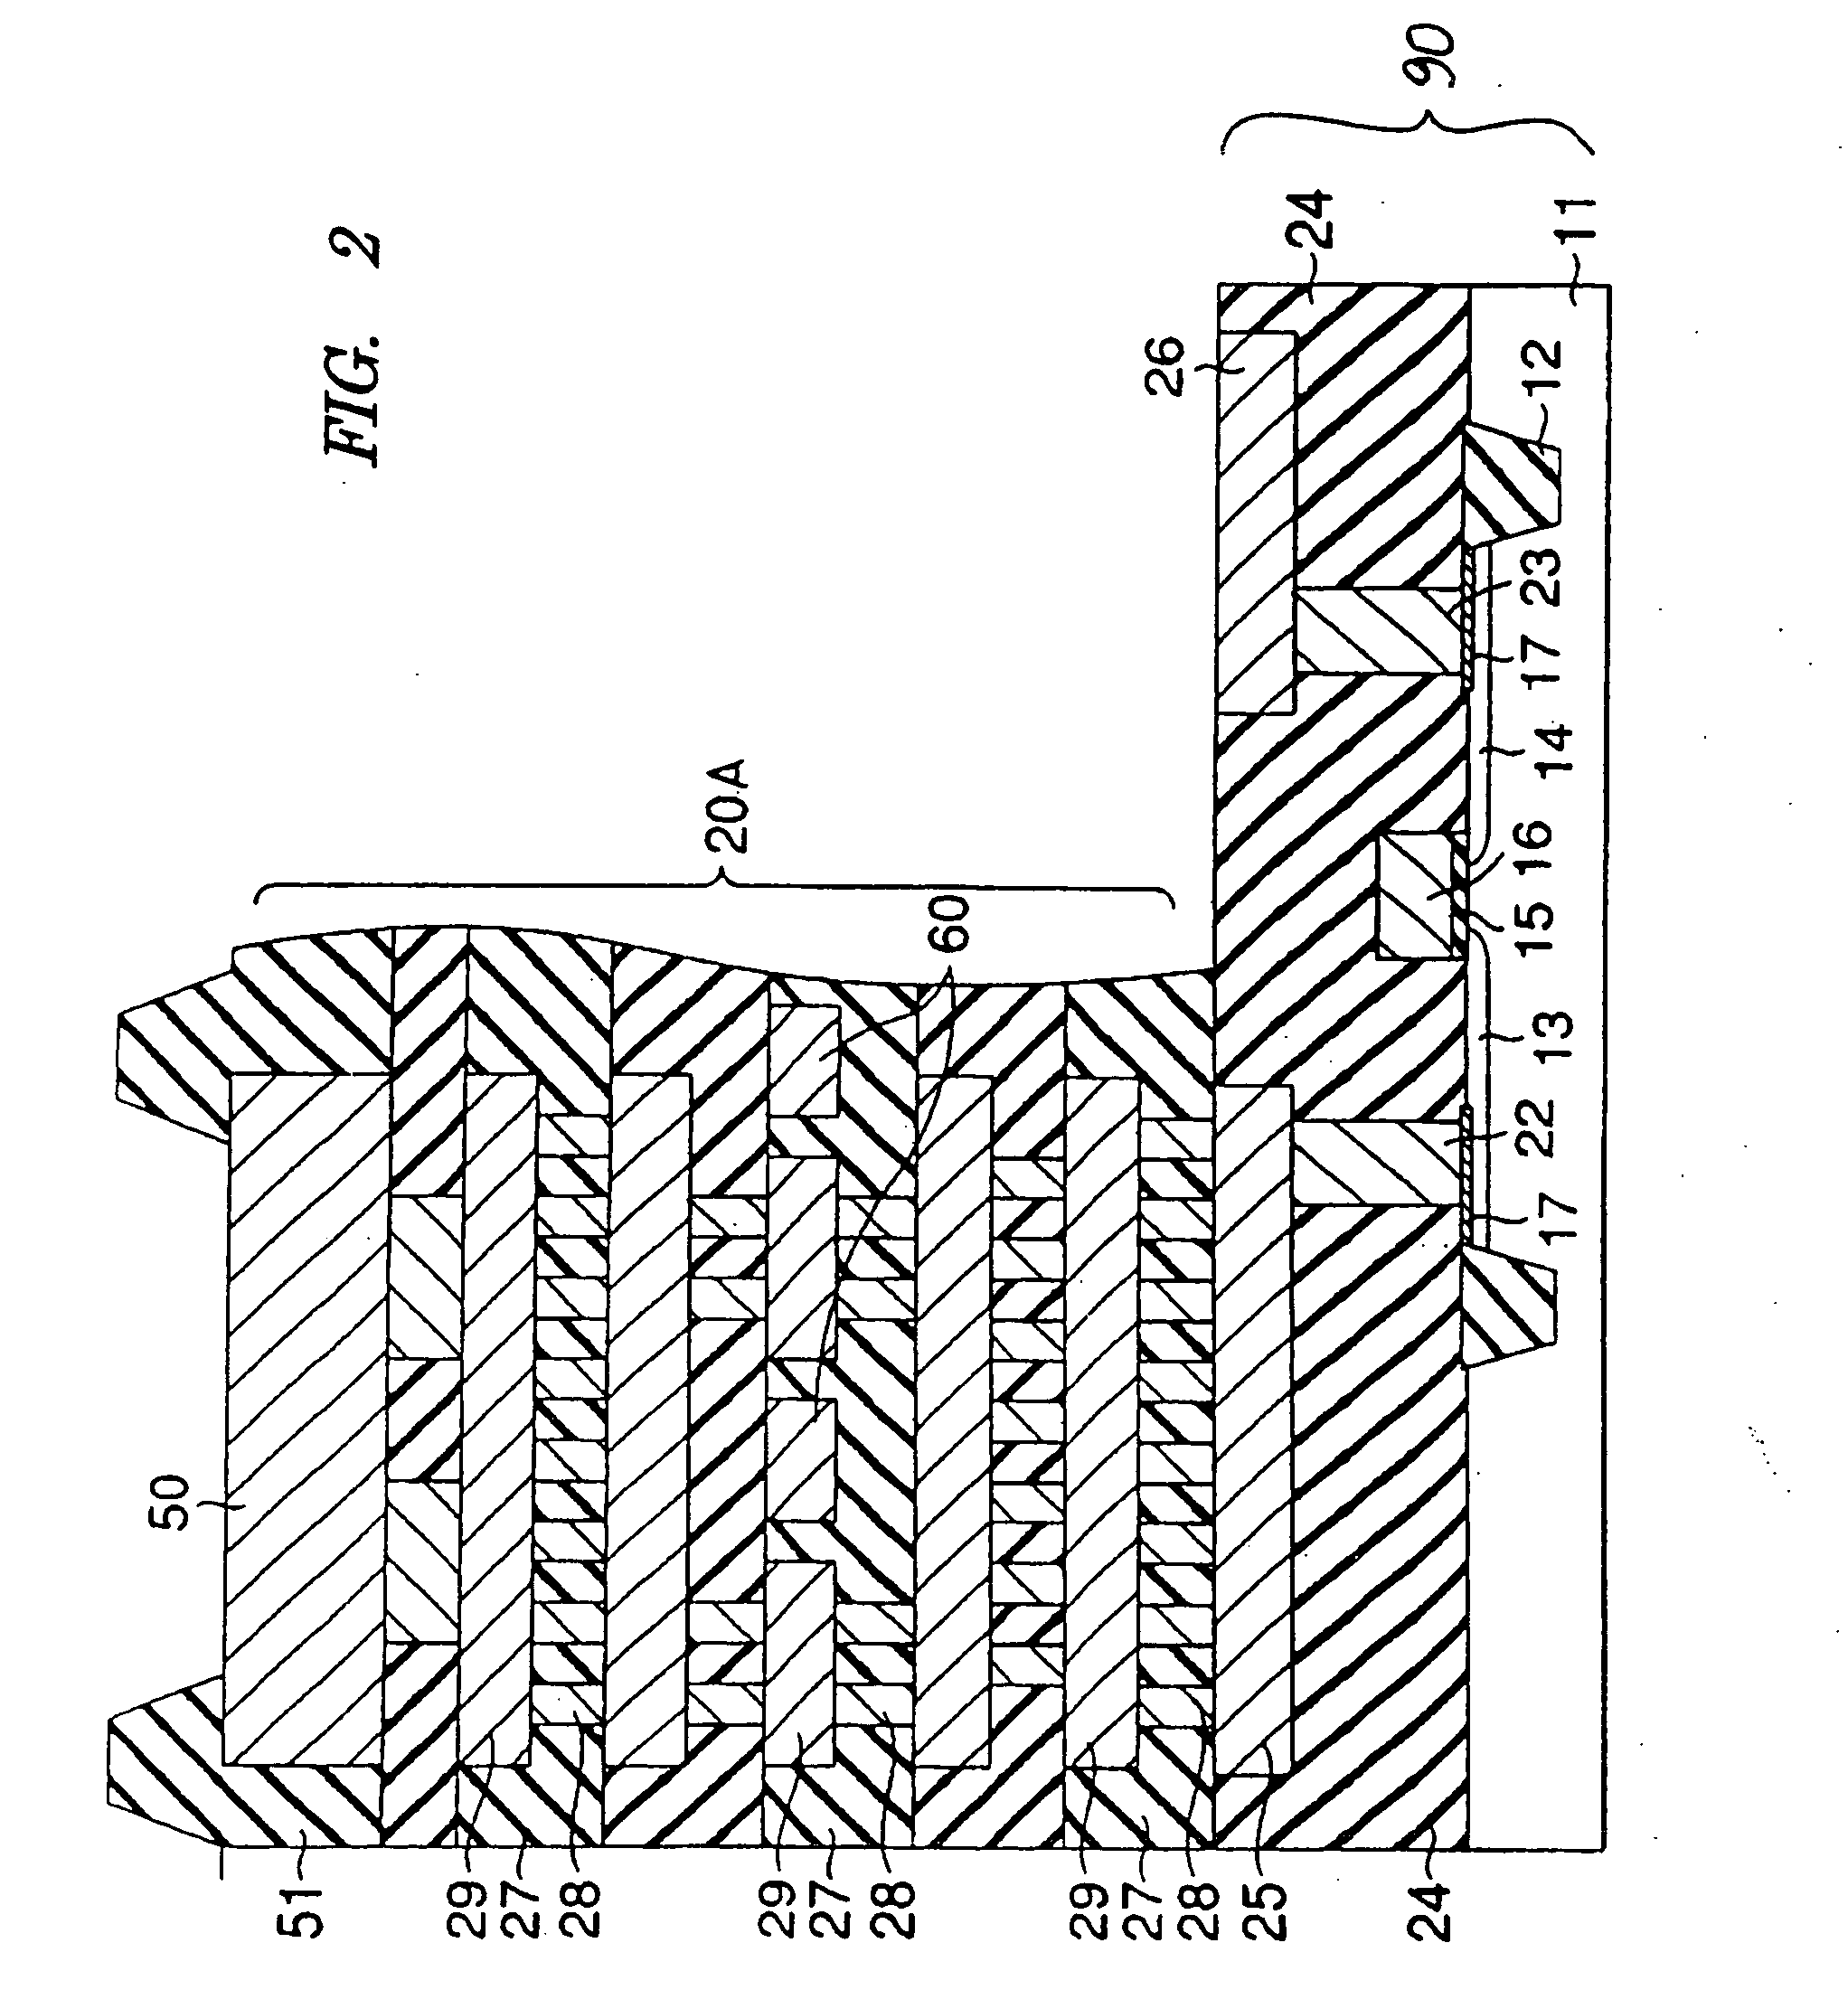 Semiconductor apparatus including a radiator for diffusing the heat generated therein